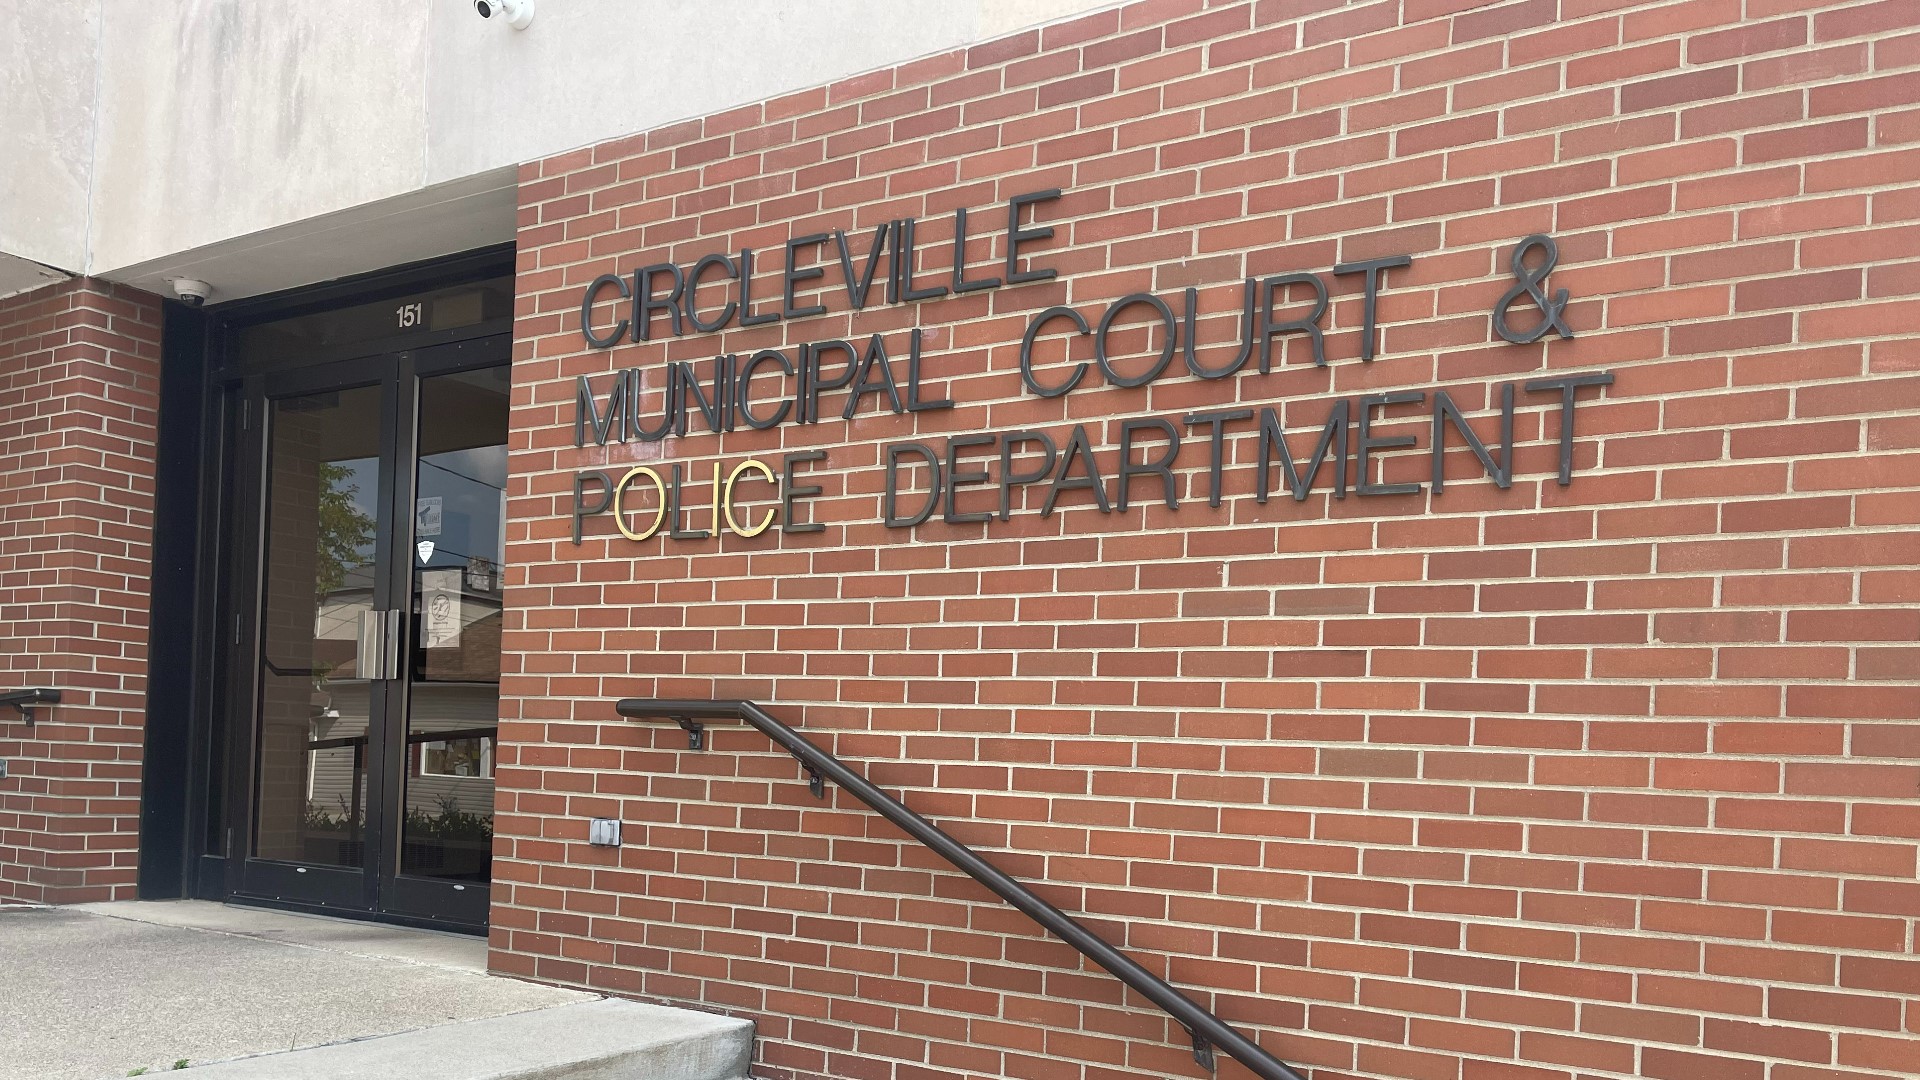 On April 11, the Circleville City Council voted in favor of separation and release agreements for former police chief Shawn Baer and deputy chief Doug Davis.